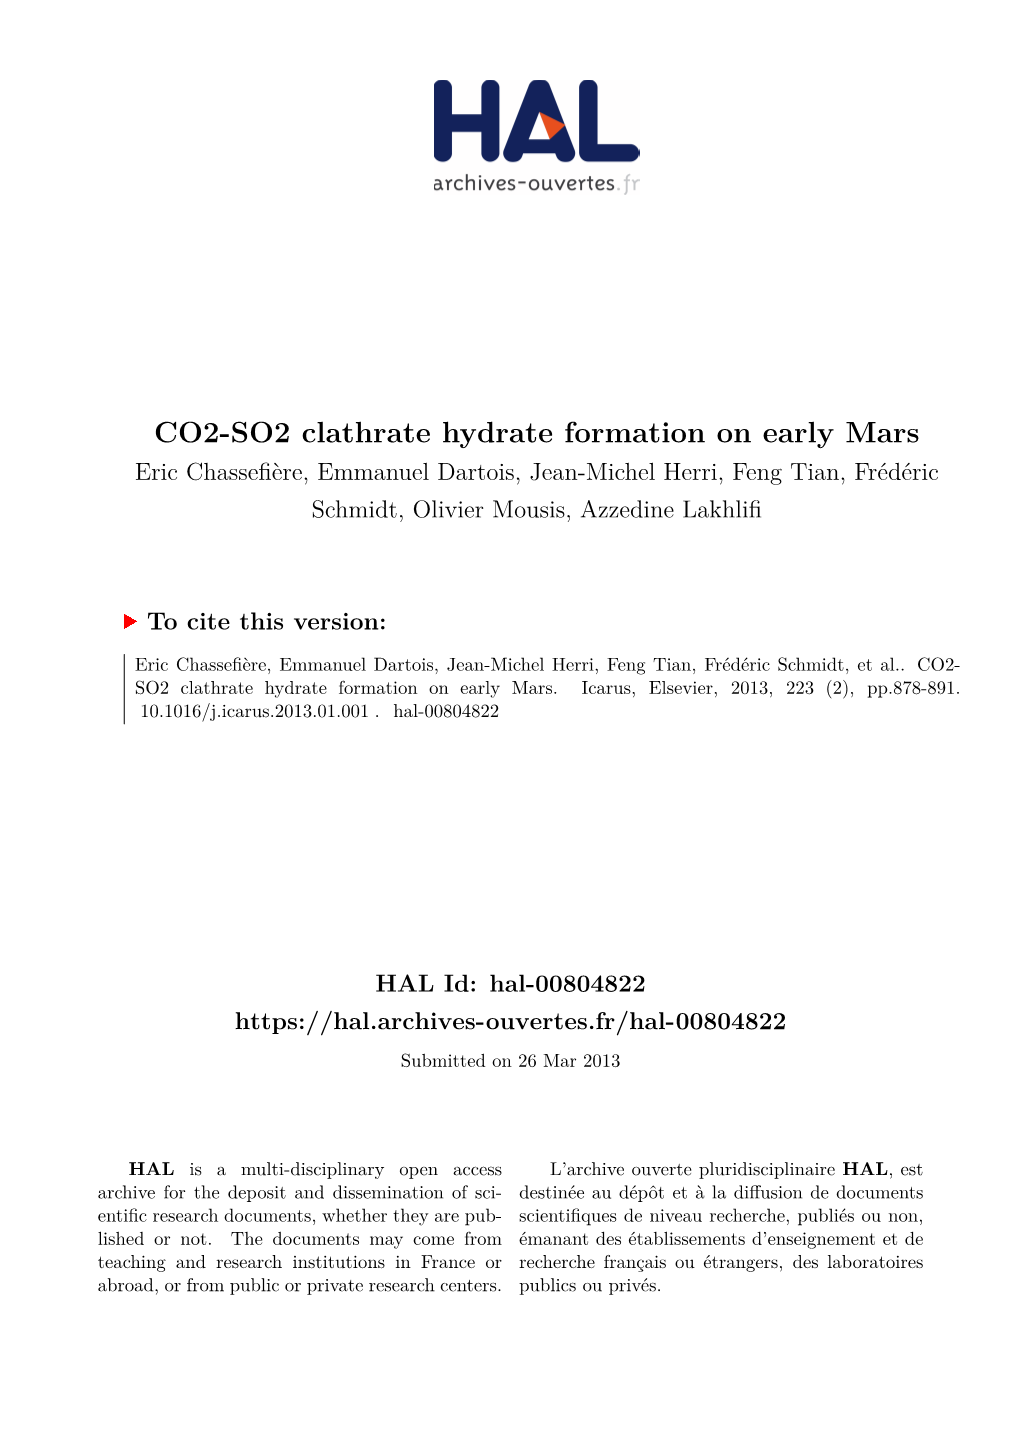 CO2-SO2 Clathrate Hydrate Formation on Early Mars